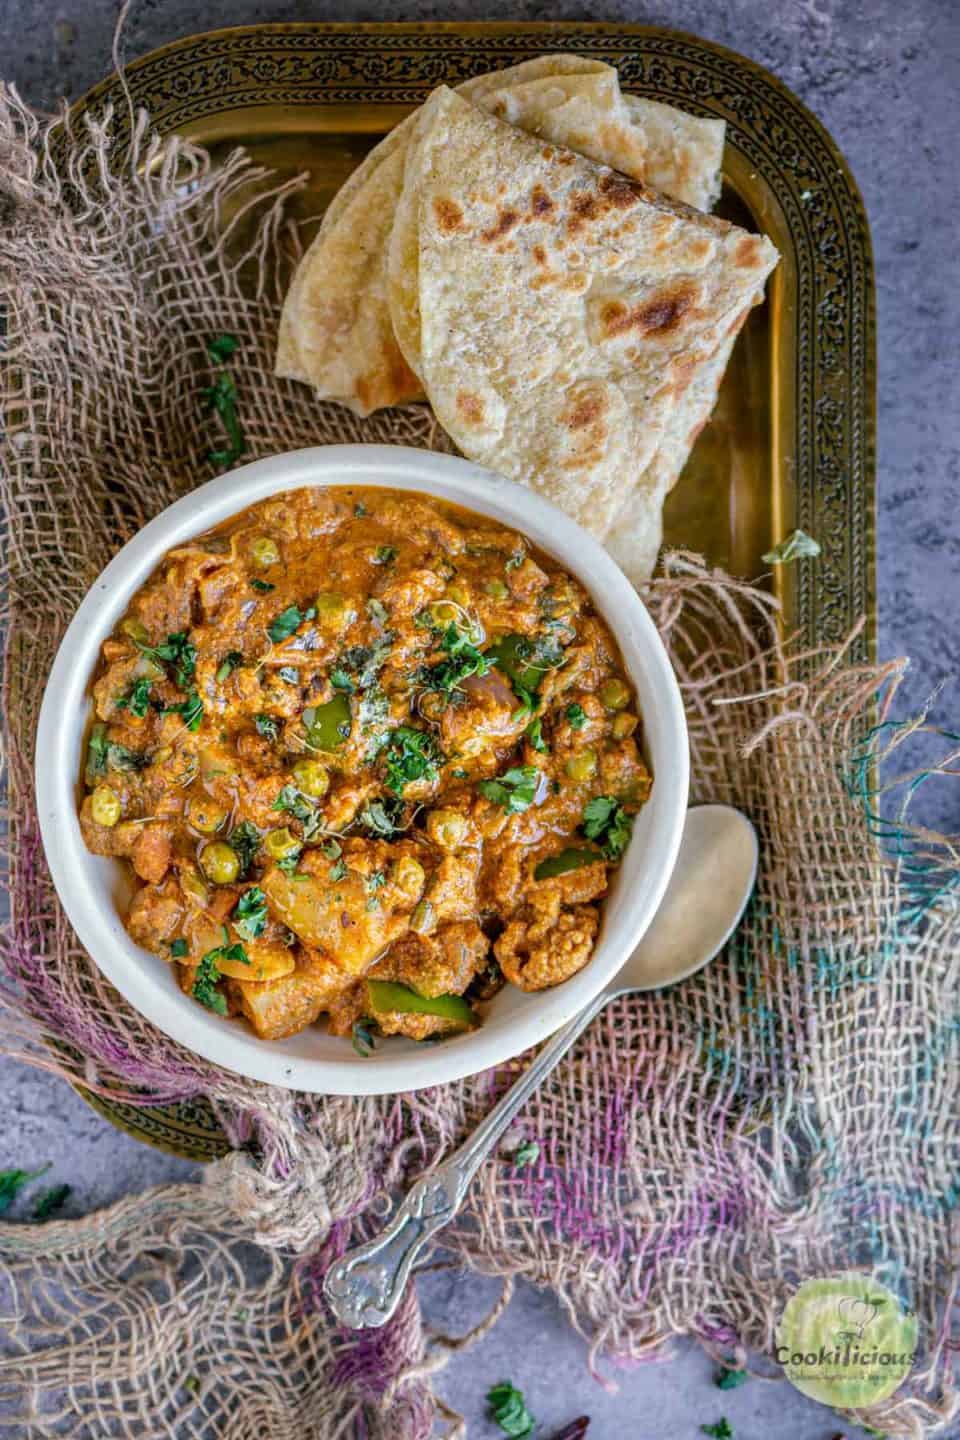 Veg Kolhapuri Recipe | Mixed Veg Curry served with chapati on the side